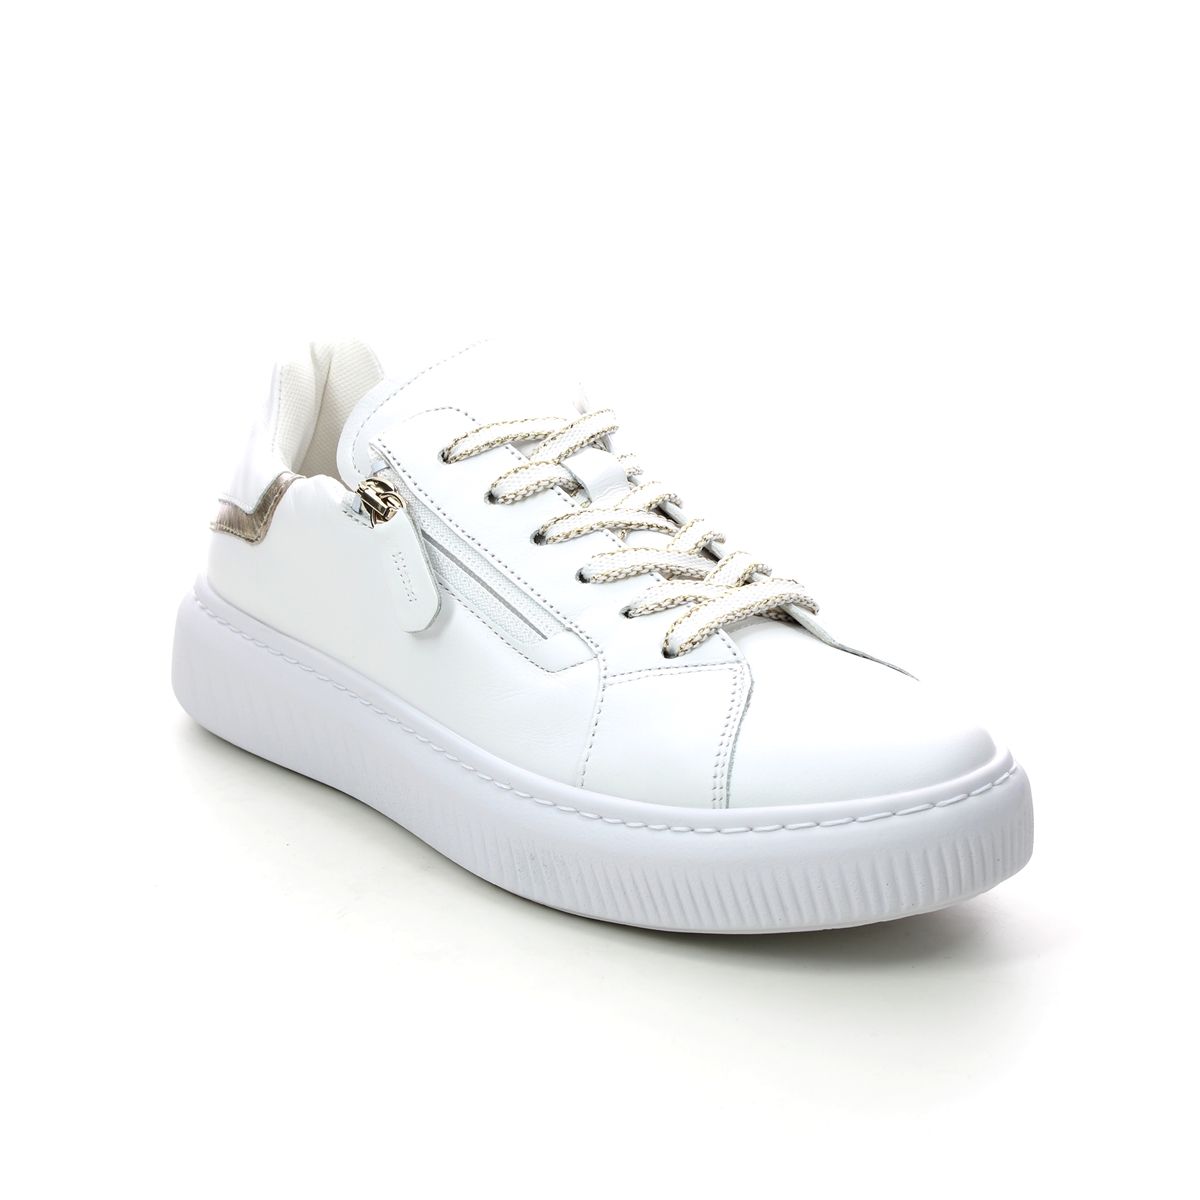 Thuisland levend Helemaal droog Gabor San Diego 86.578.51 White Gold trainers